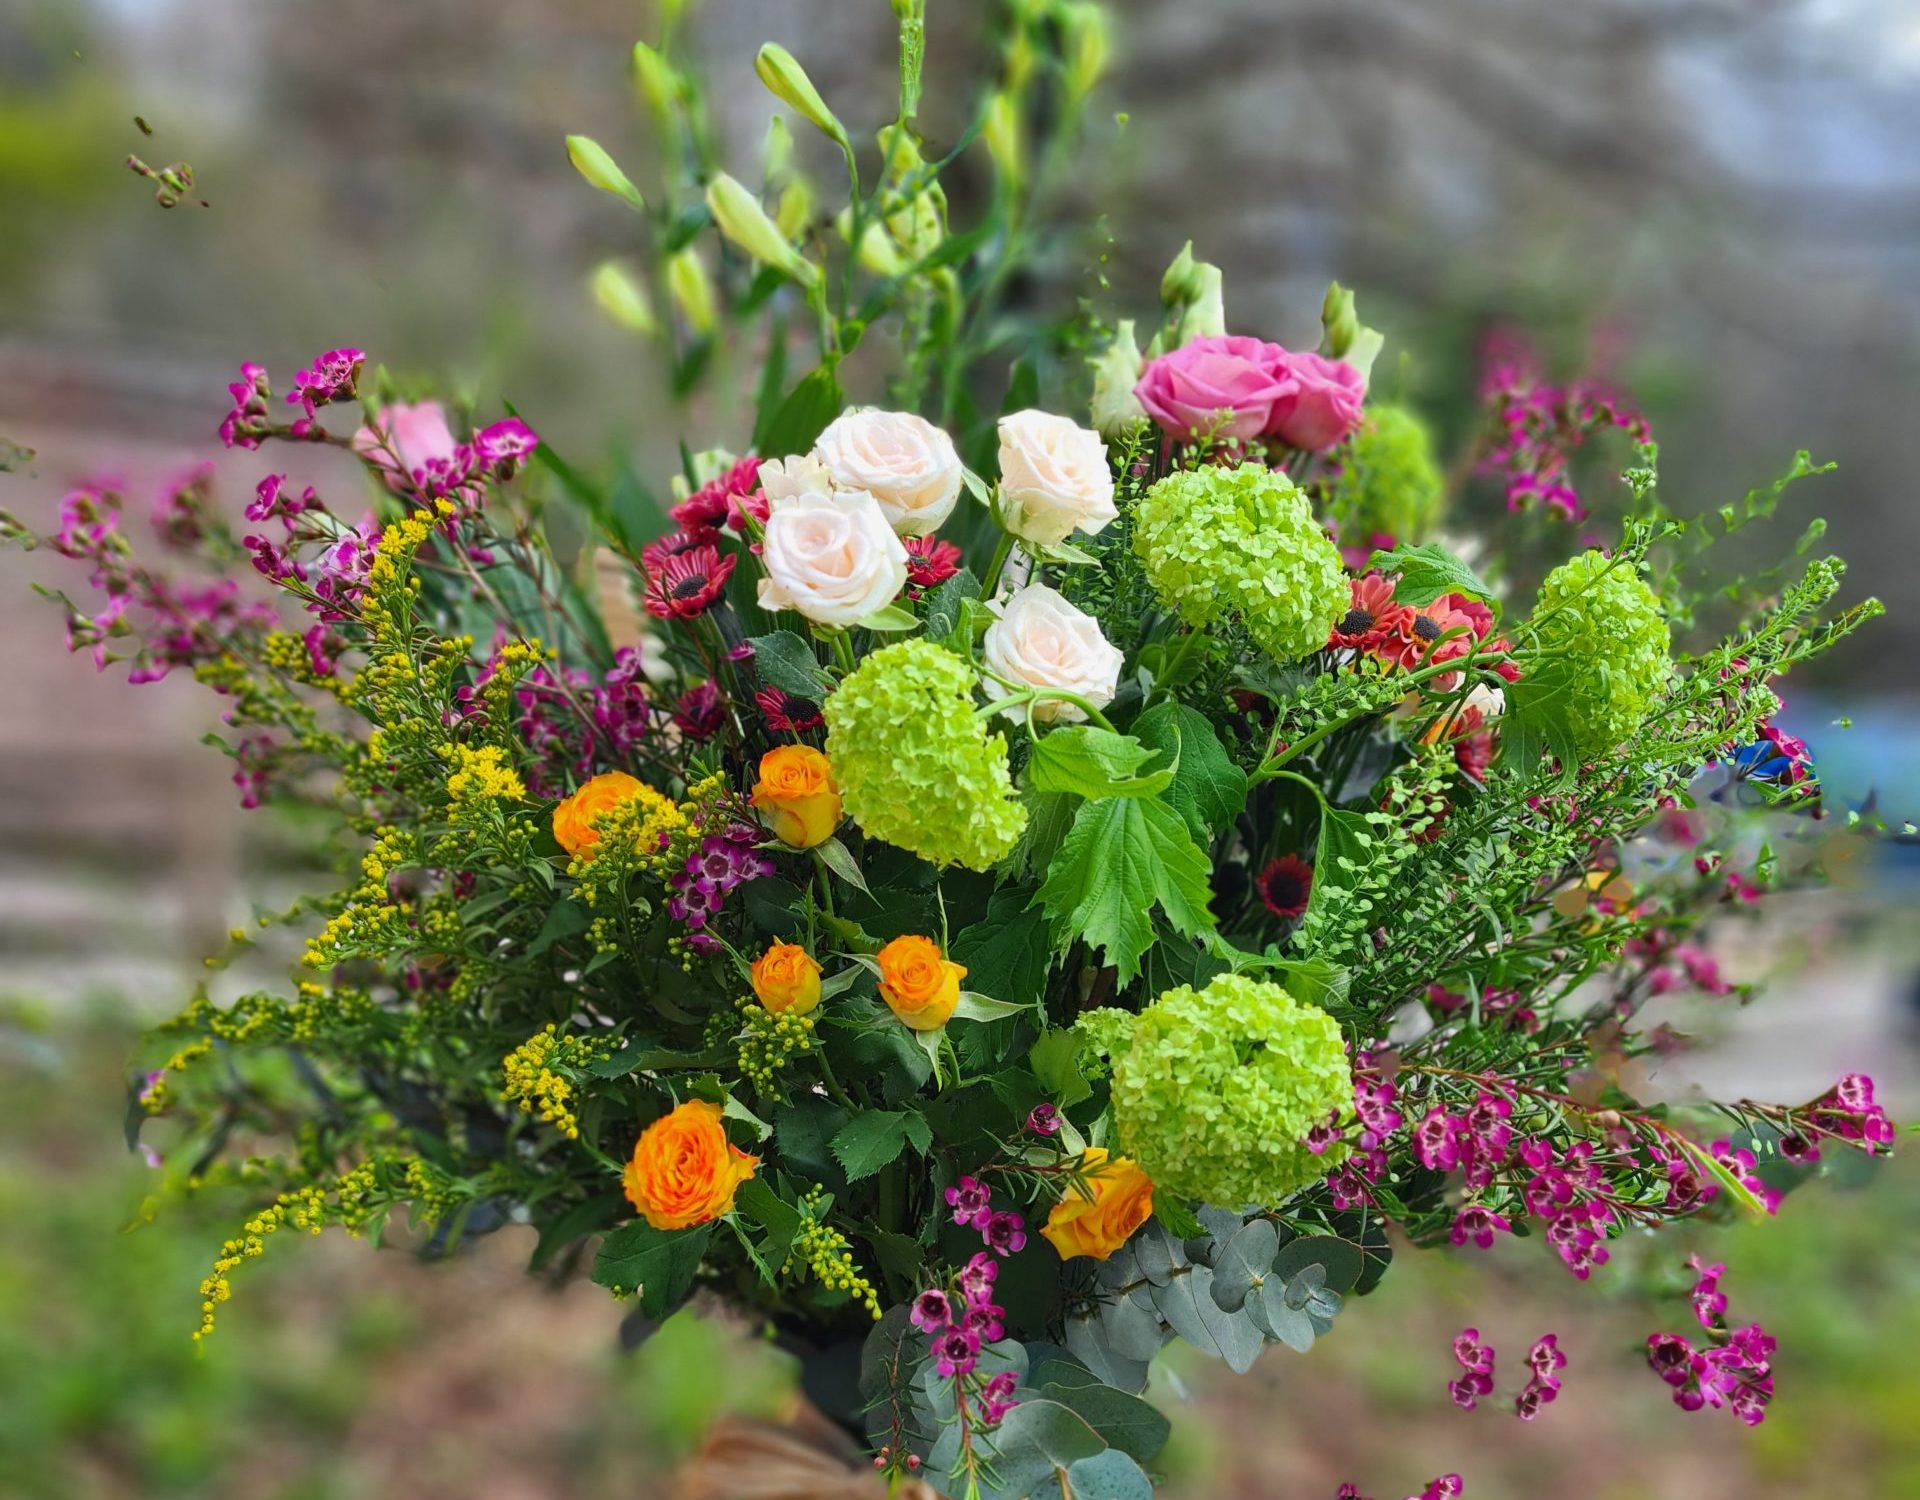 mothers day flowers-gift bouquets-flower delivery Torquay-Paignton-Torbay florist